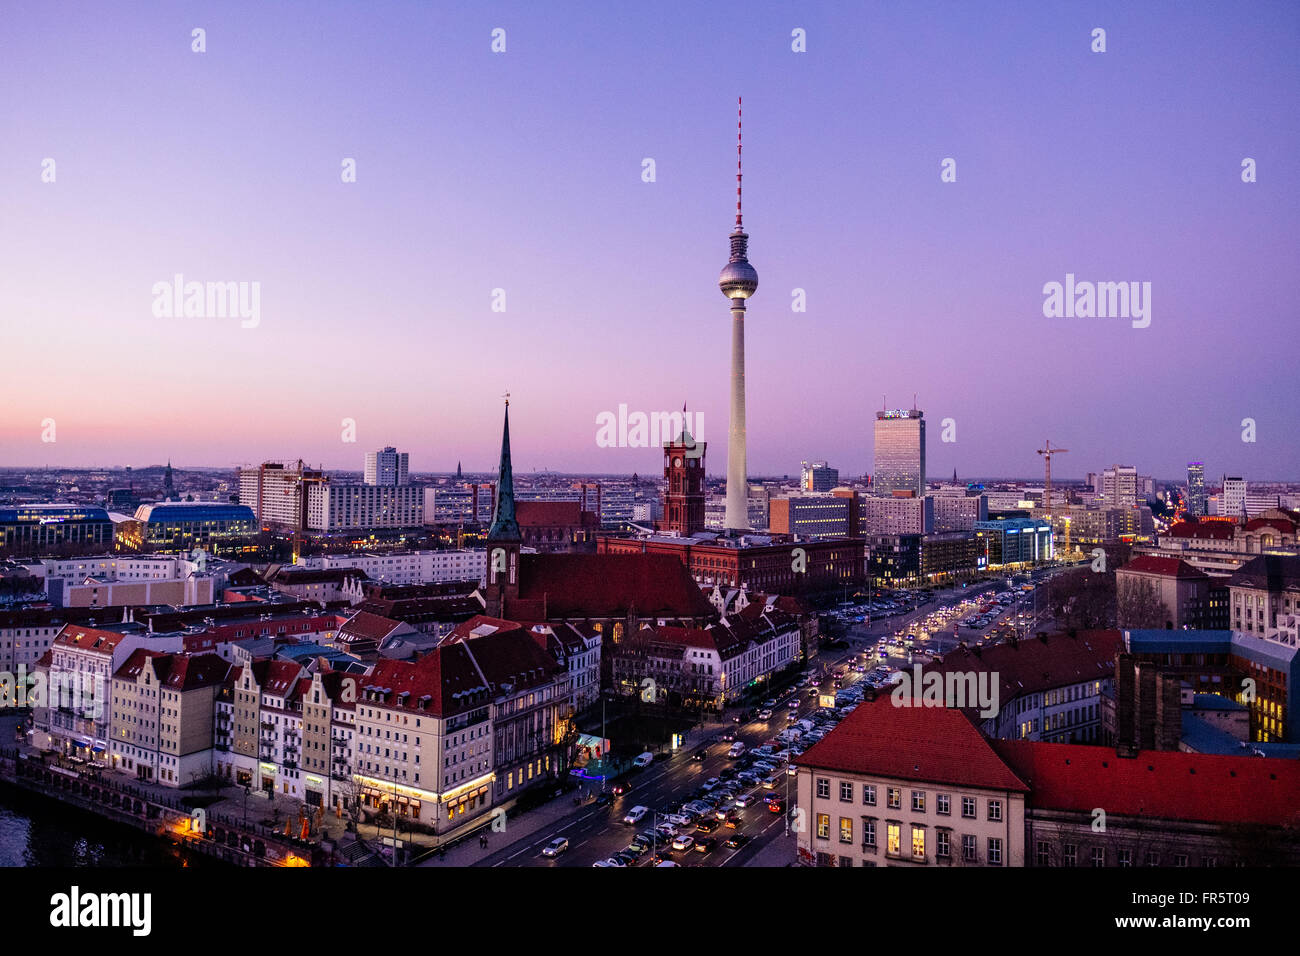 View of the Spree river, Berlin Cathedral, Nikolaiviertel district with St. Nicholas Church, television tower at Alexanderplatz, Red Town Hall and Park Inn Hotel in Berlin, Germany 16.03.2016. Photo: picture alliance / Robert Schlesinger Stock Photo